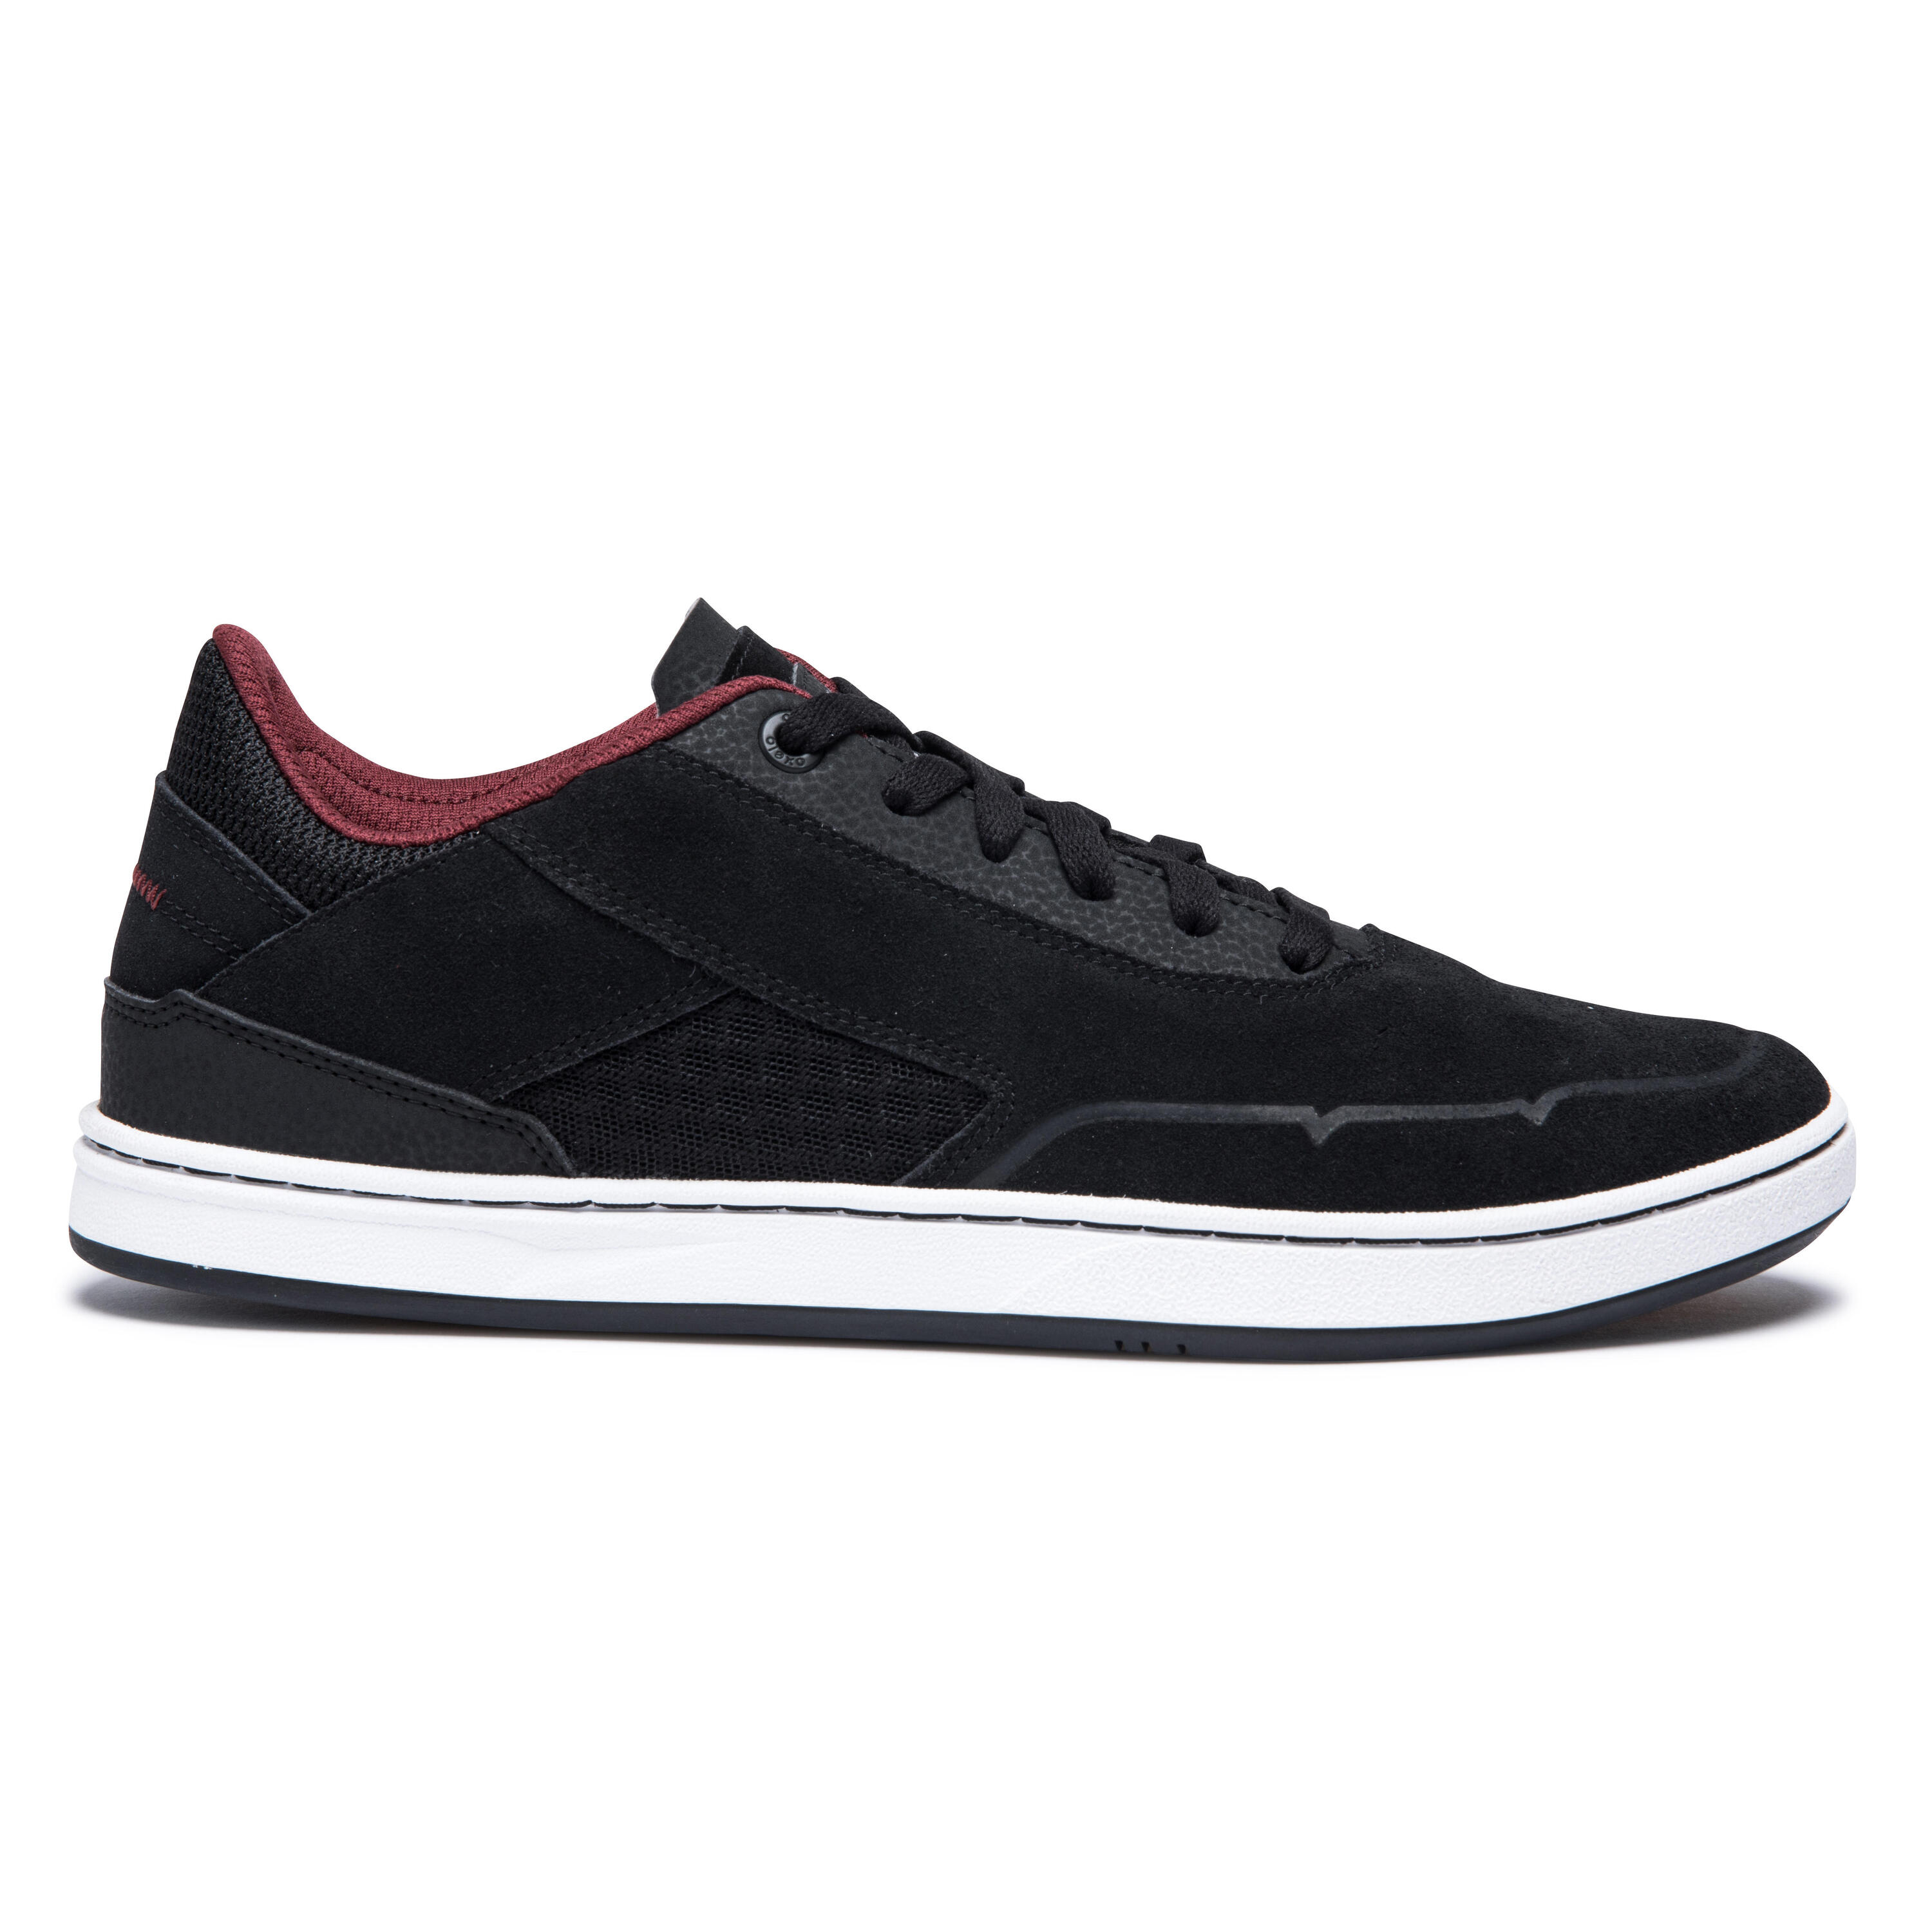 Crush 500 Adult Low-Top Cupsole Skate Shoes - Black/Burgundy 14/14